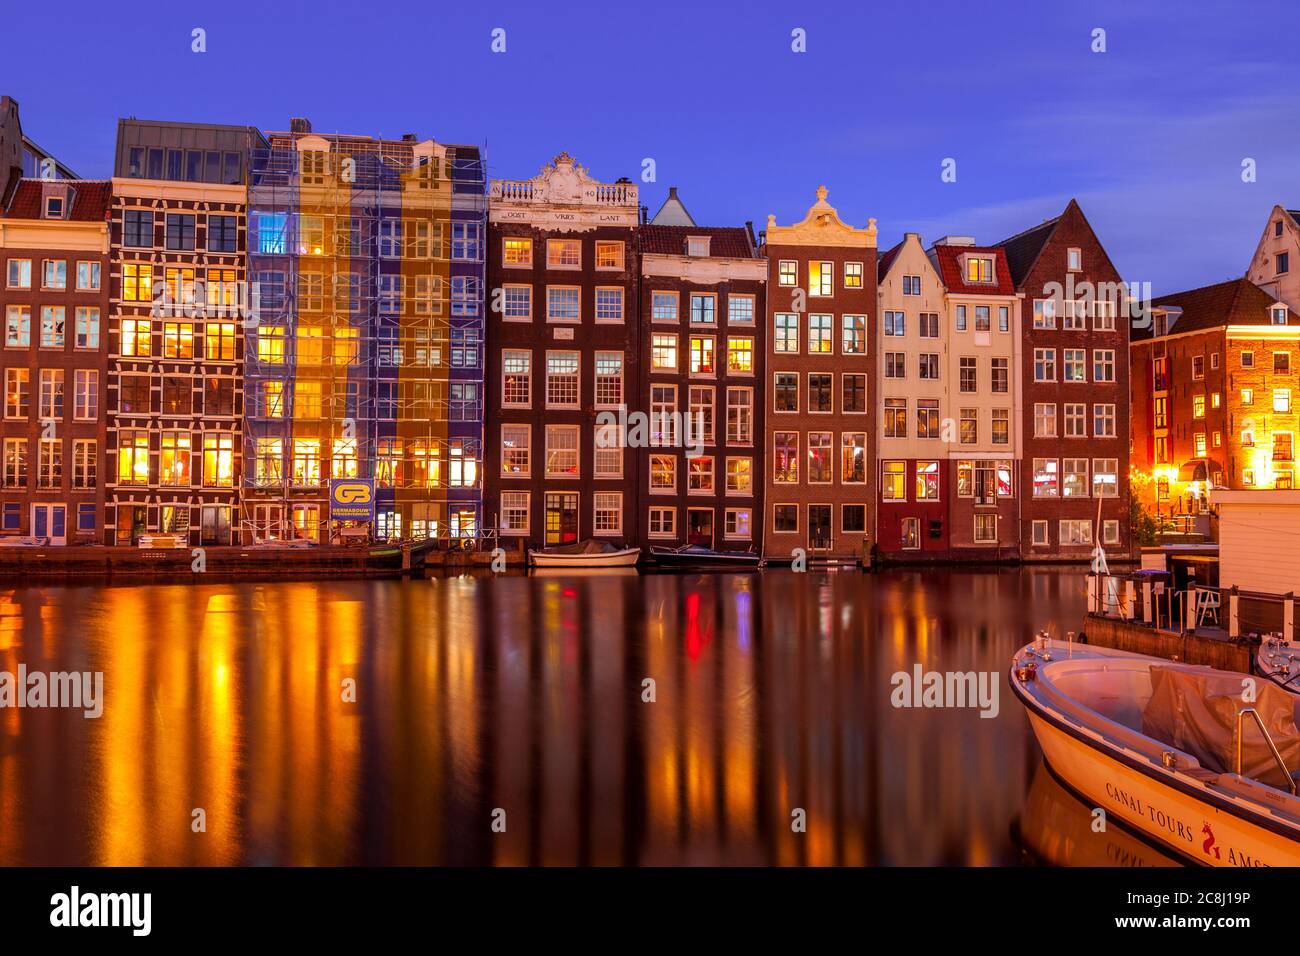 Row houses along a canal in Damrak, Amsterdam Stock Photo